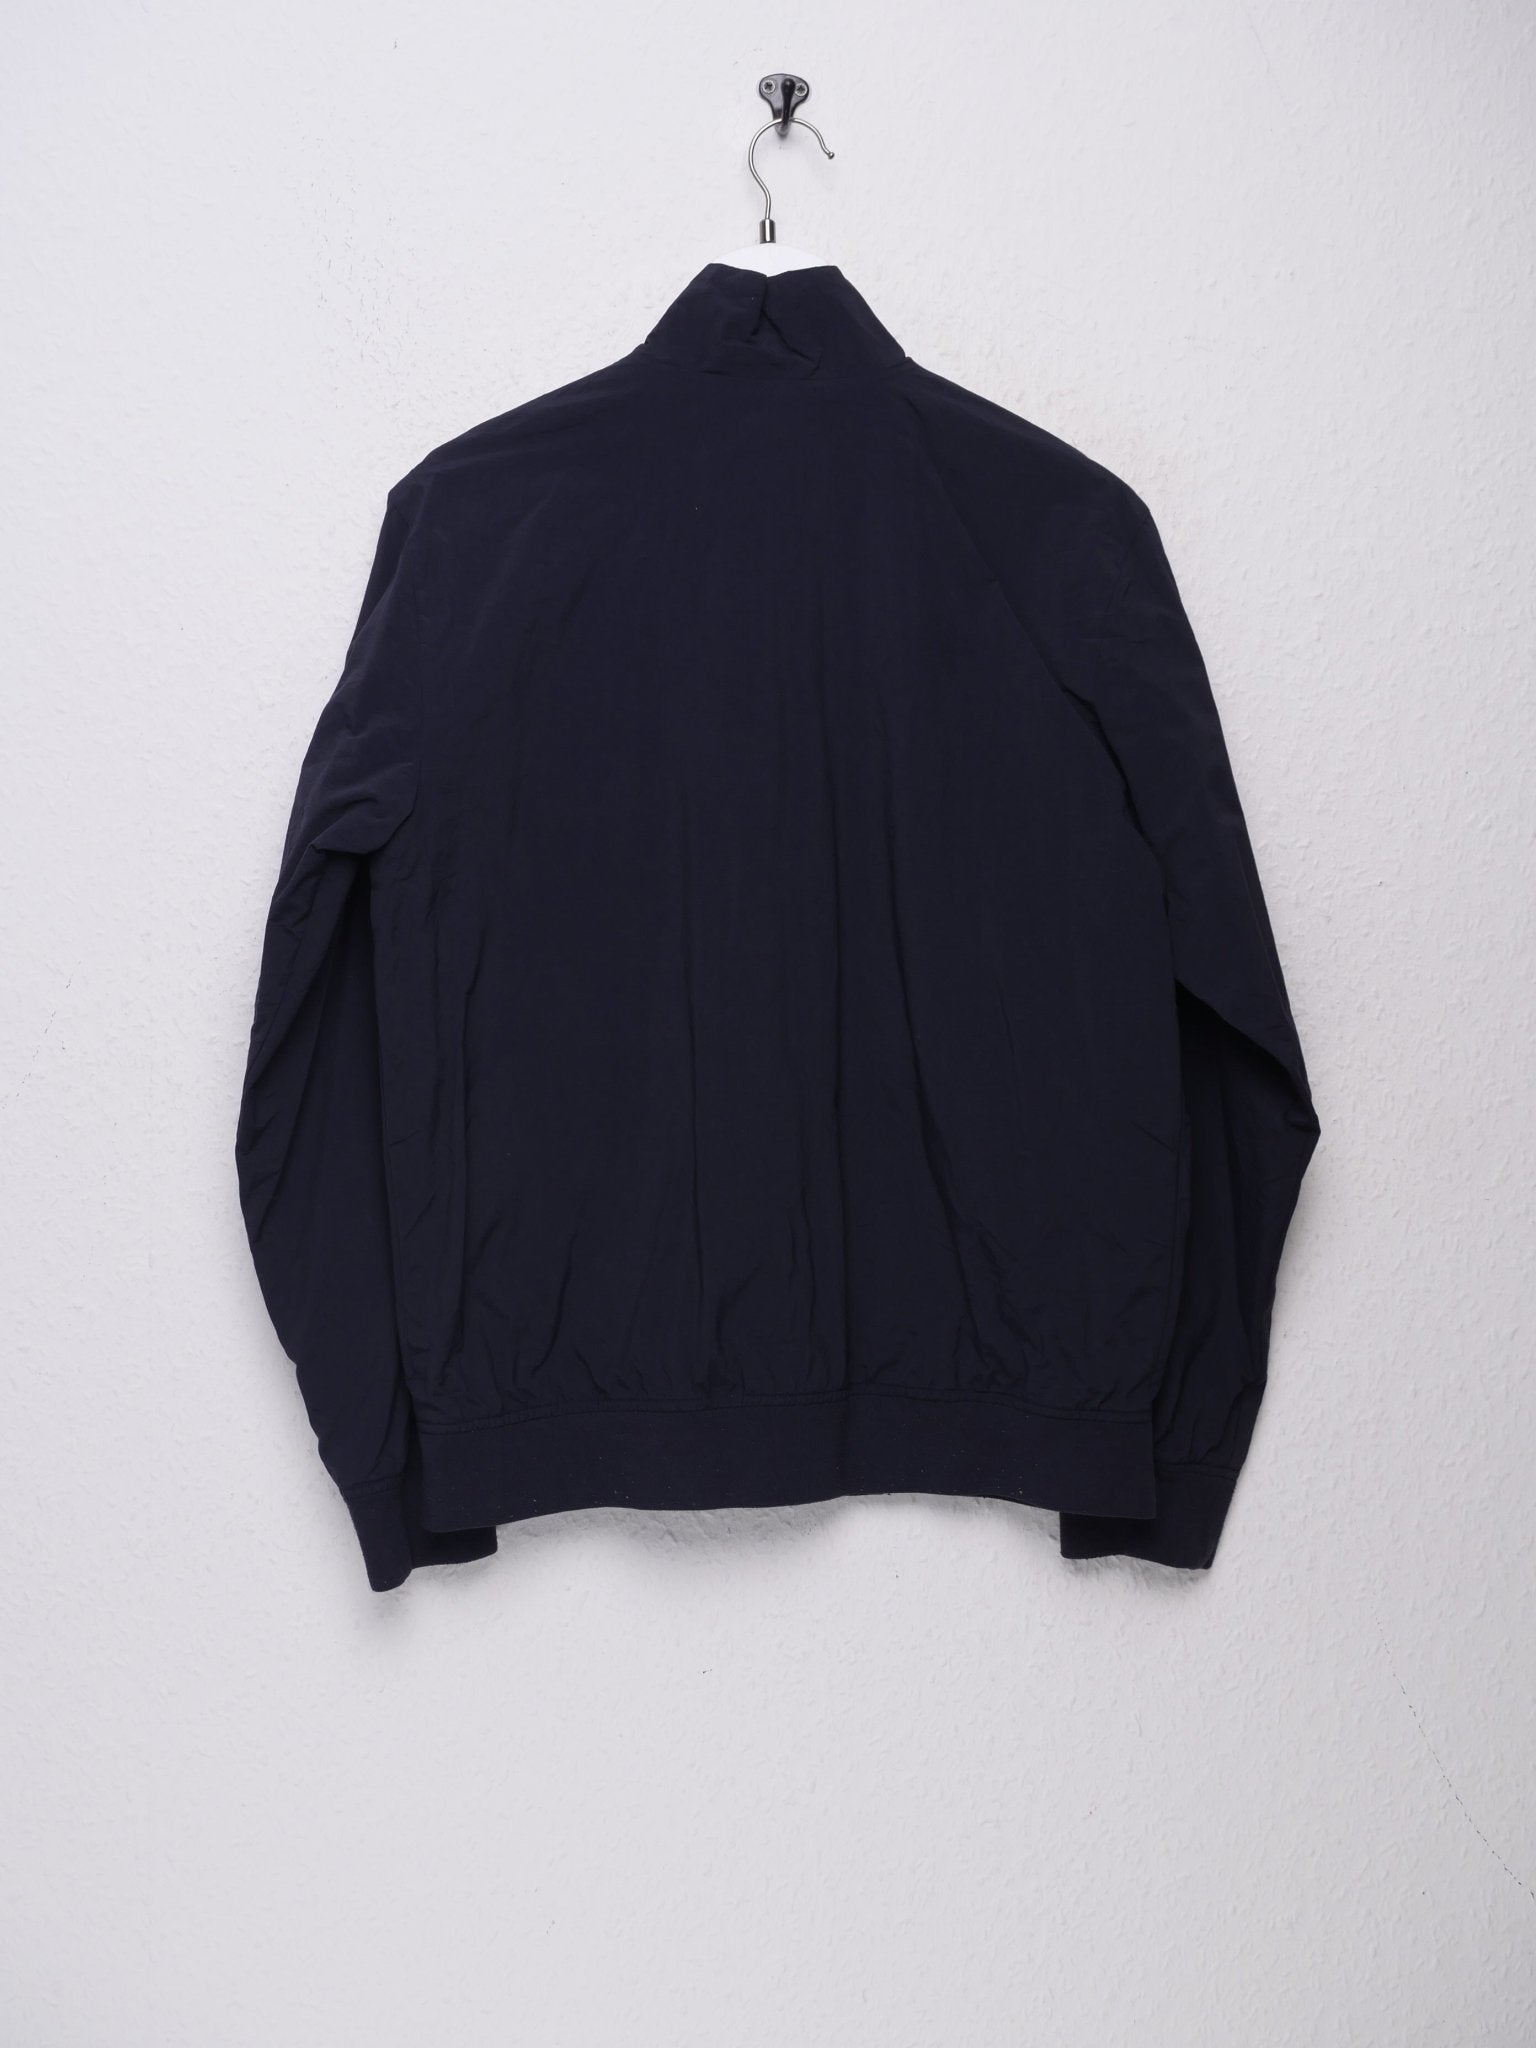 Chaps embroidered Logo navy Jacket - Peeces